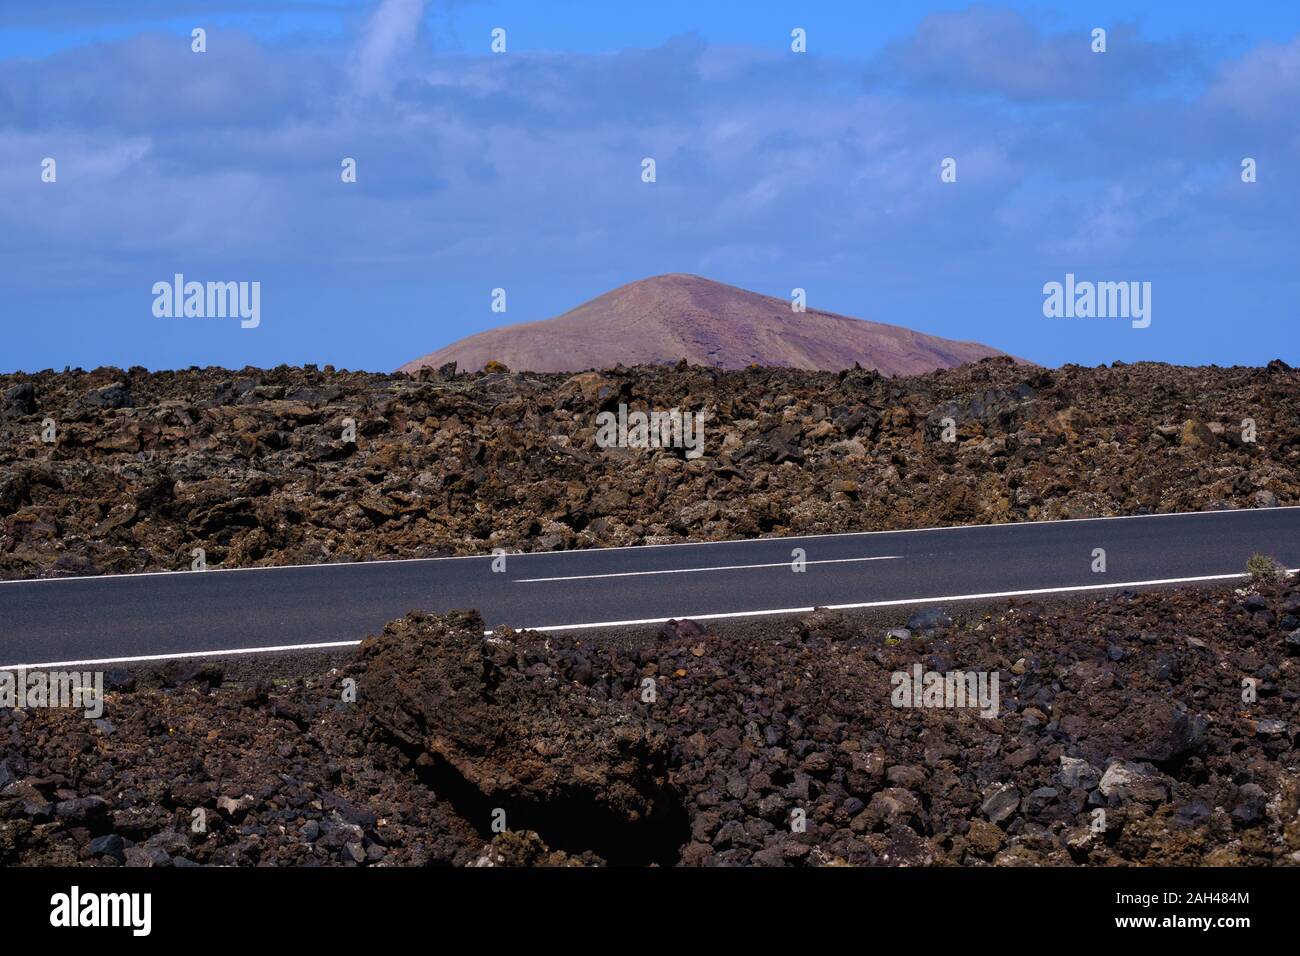 Spain, Canary Islands, Lanzarote, Country road crossing lava field Stock Photo